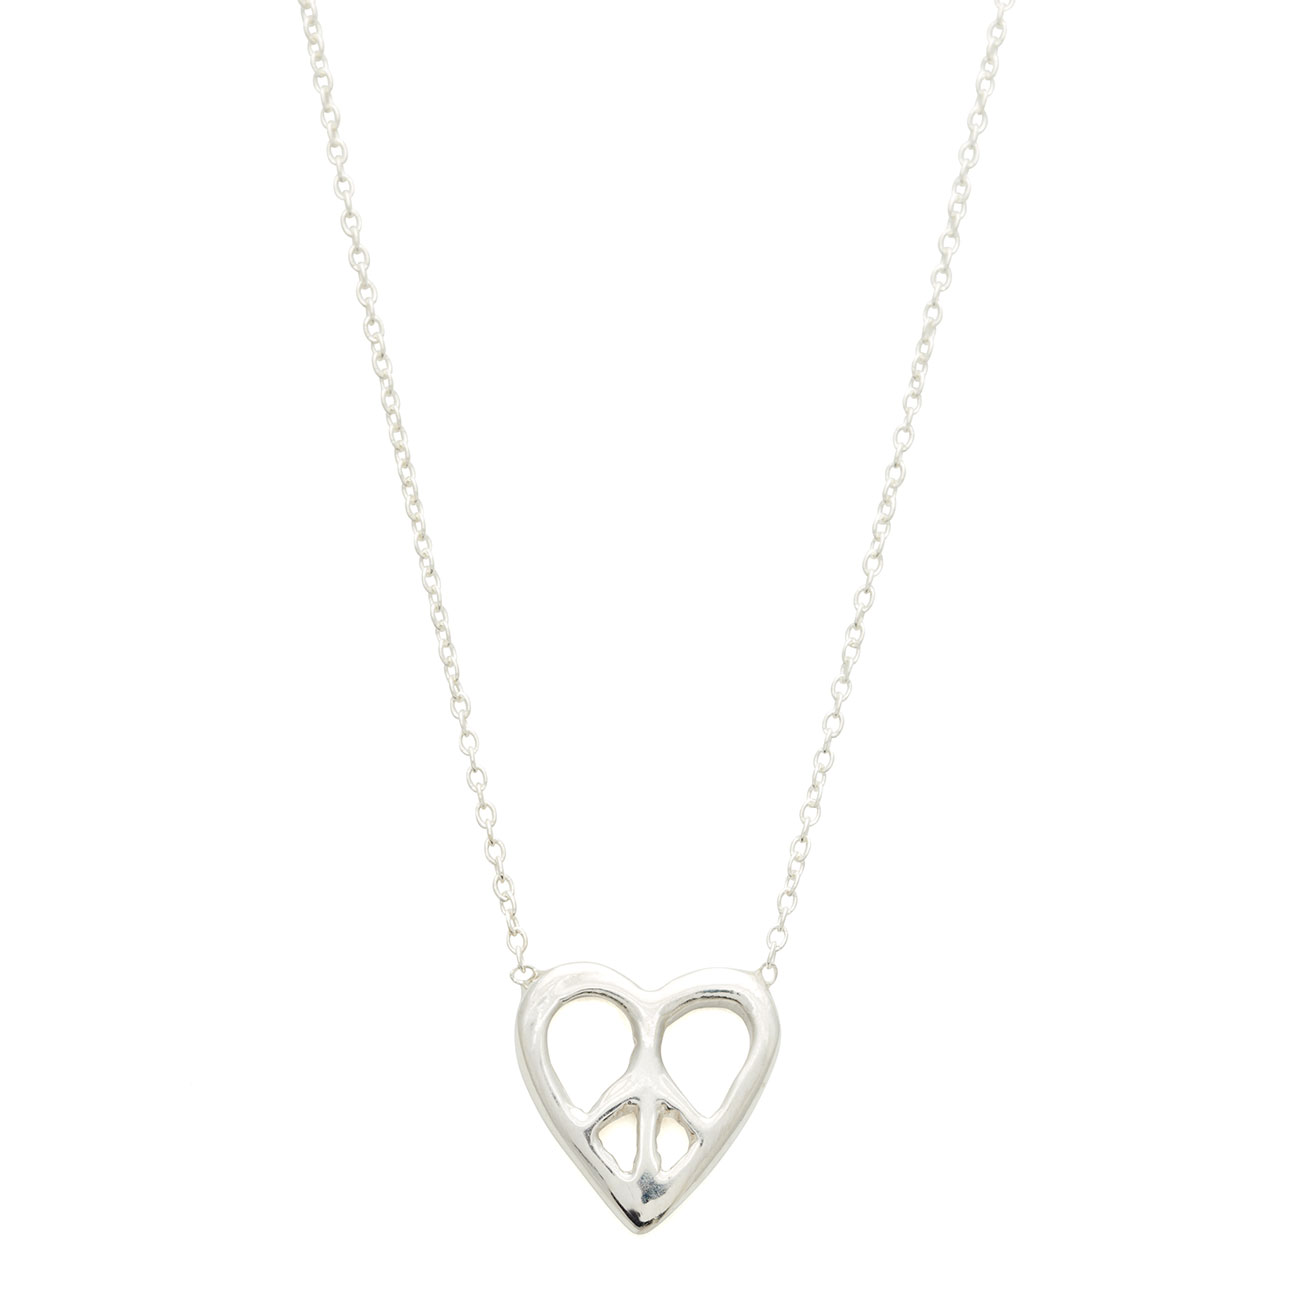 Sterling Silver Peace Heart Necklace With White Diamonds - Elisa Solomon